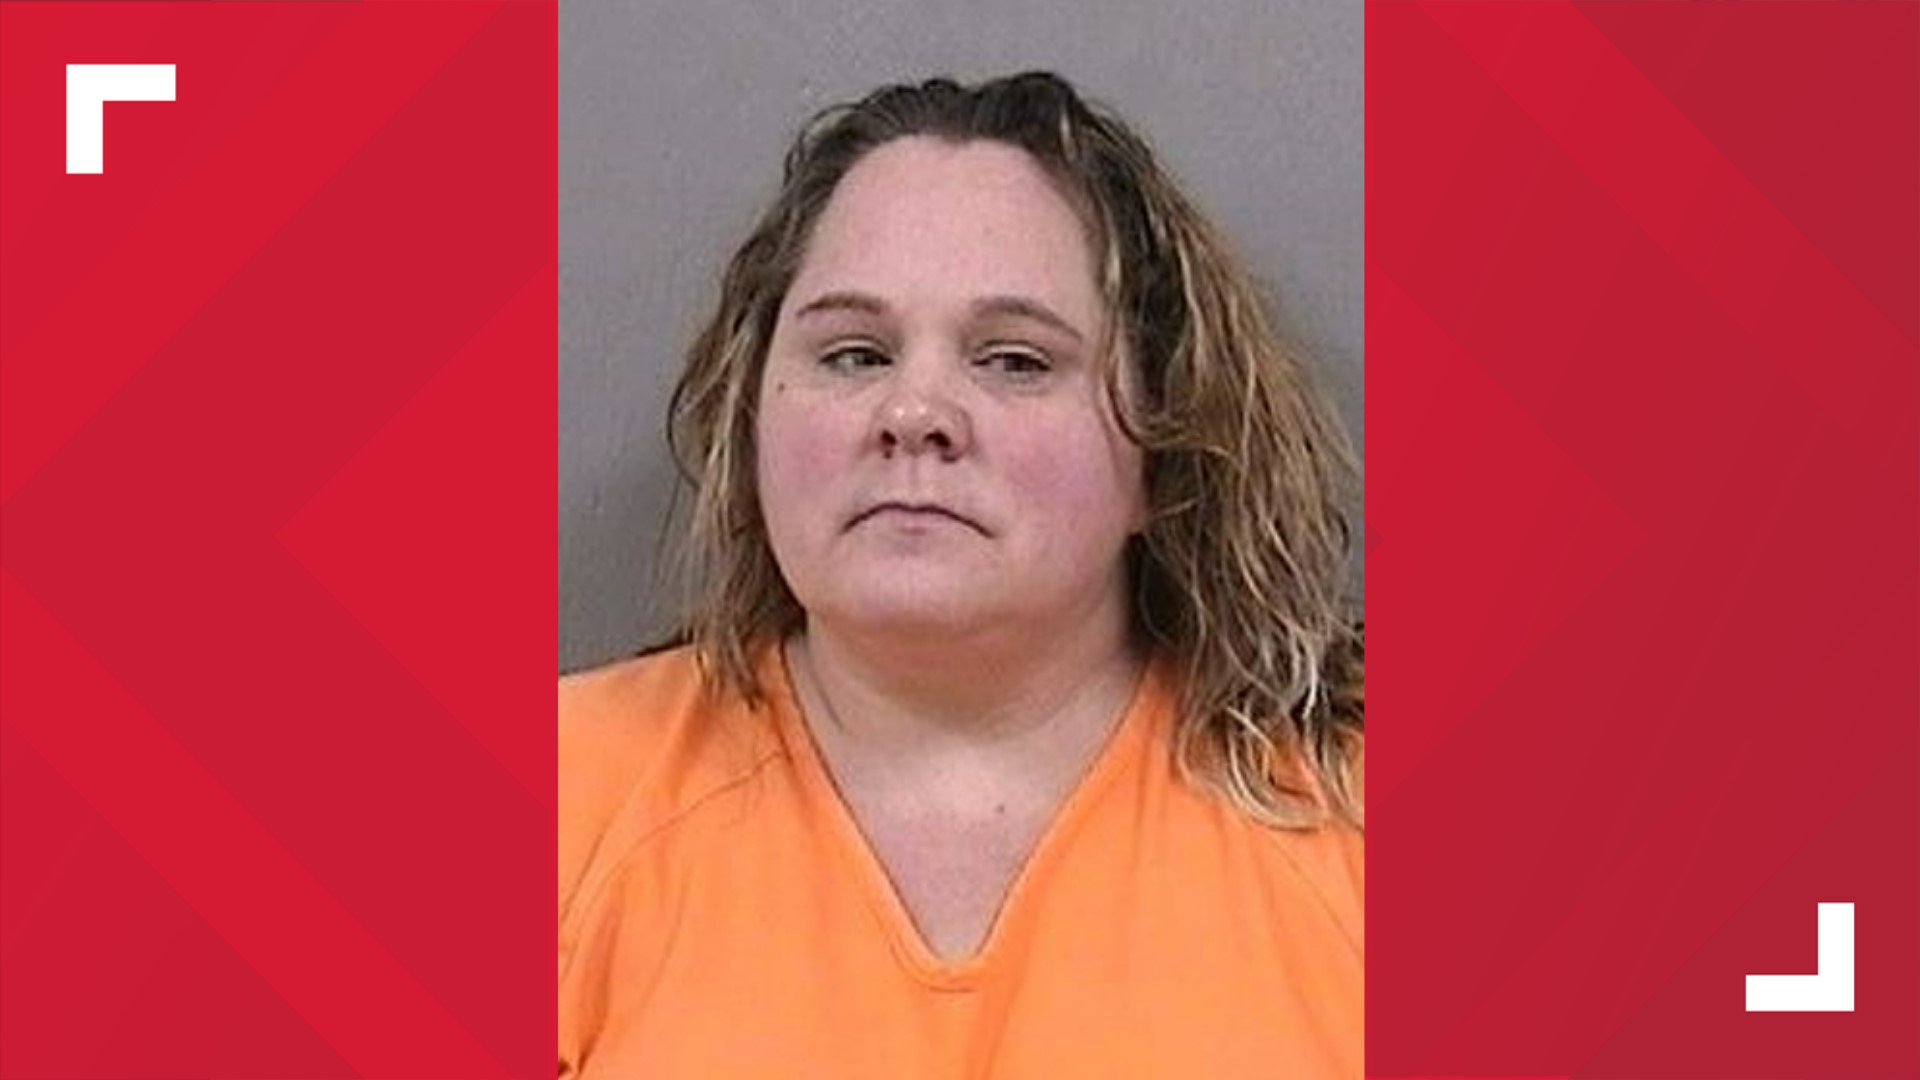 Pamela Reed is charged with theft by deception, a felony of the fourth degree.